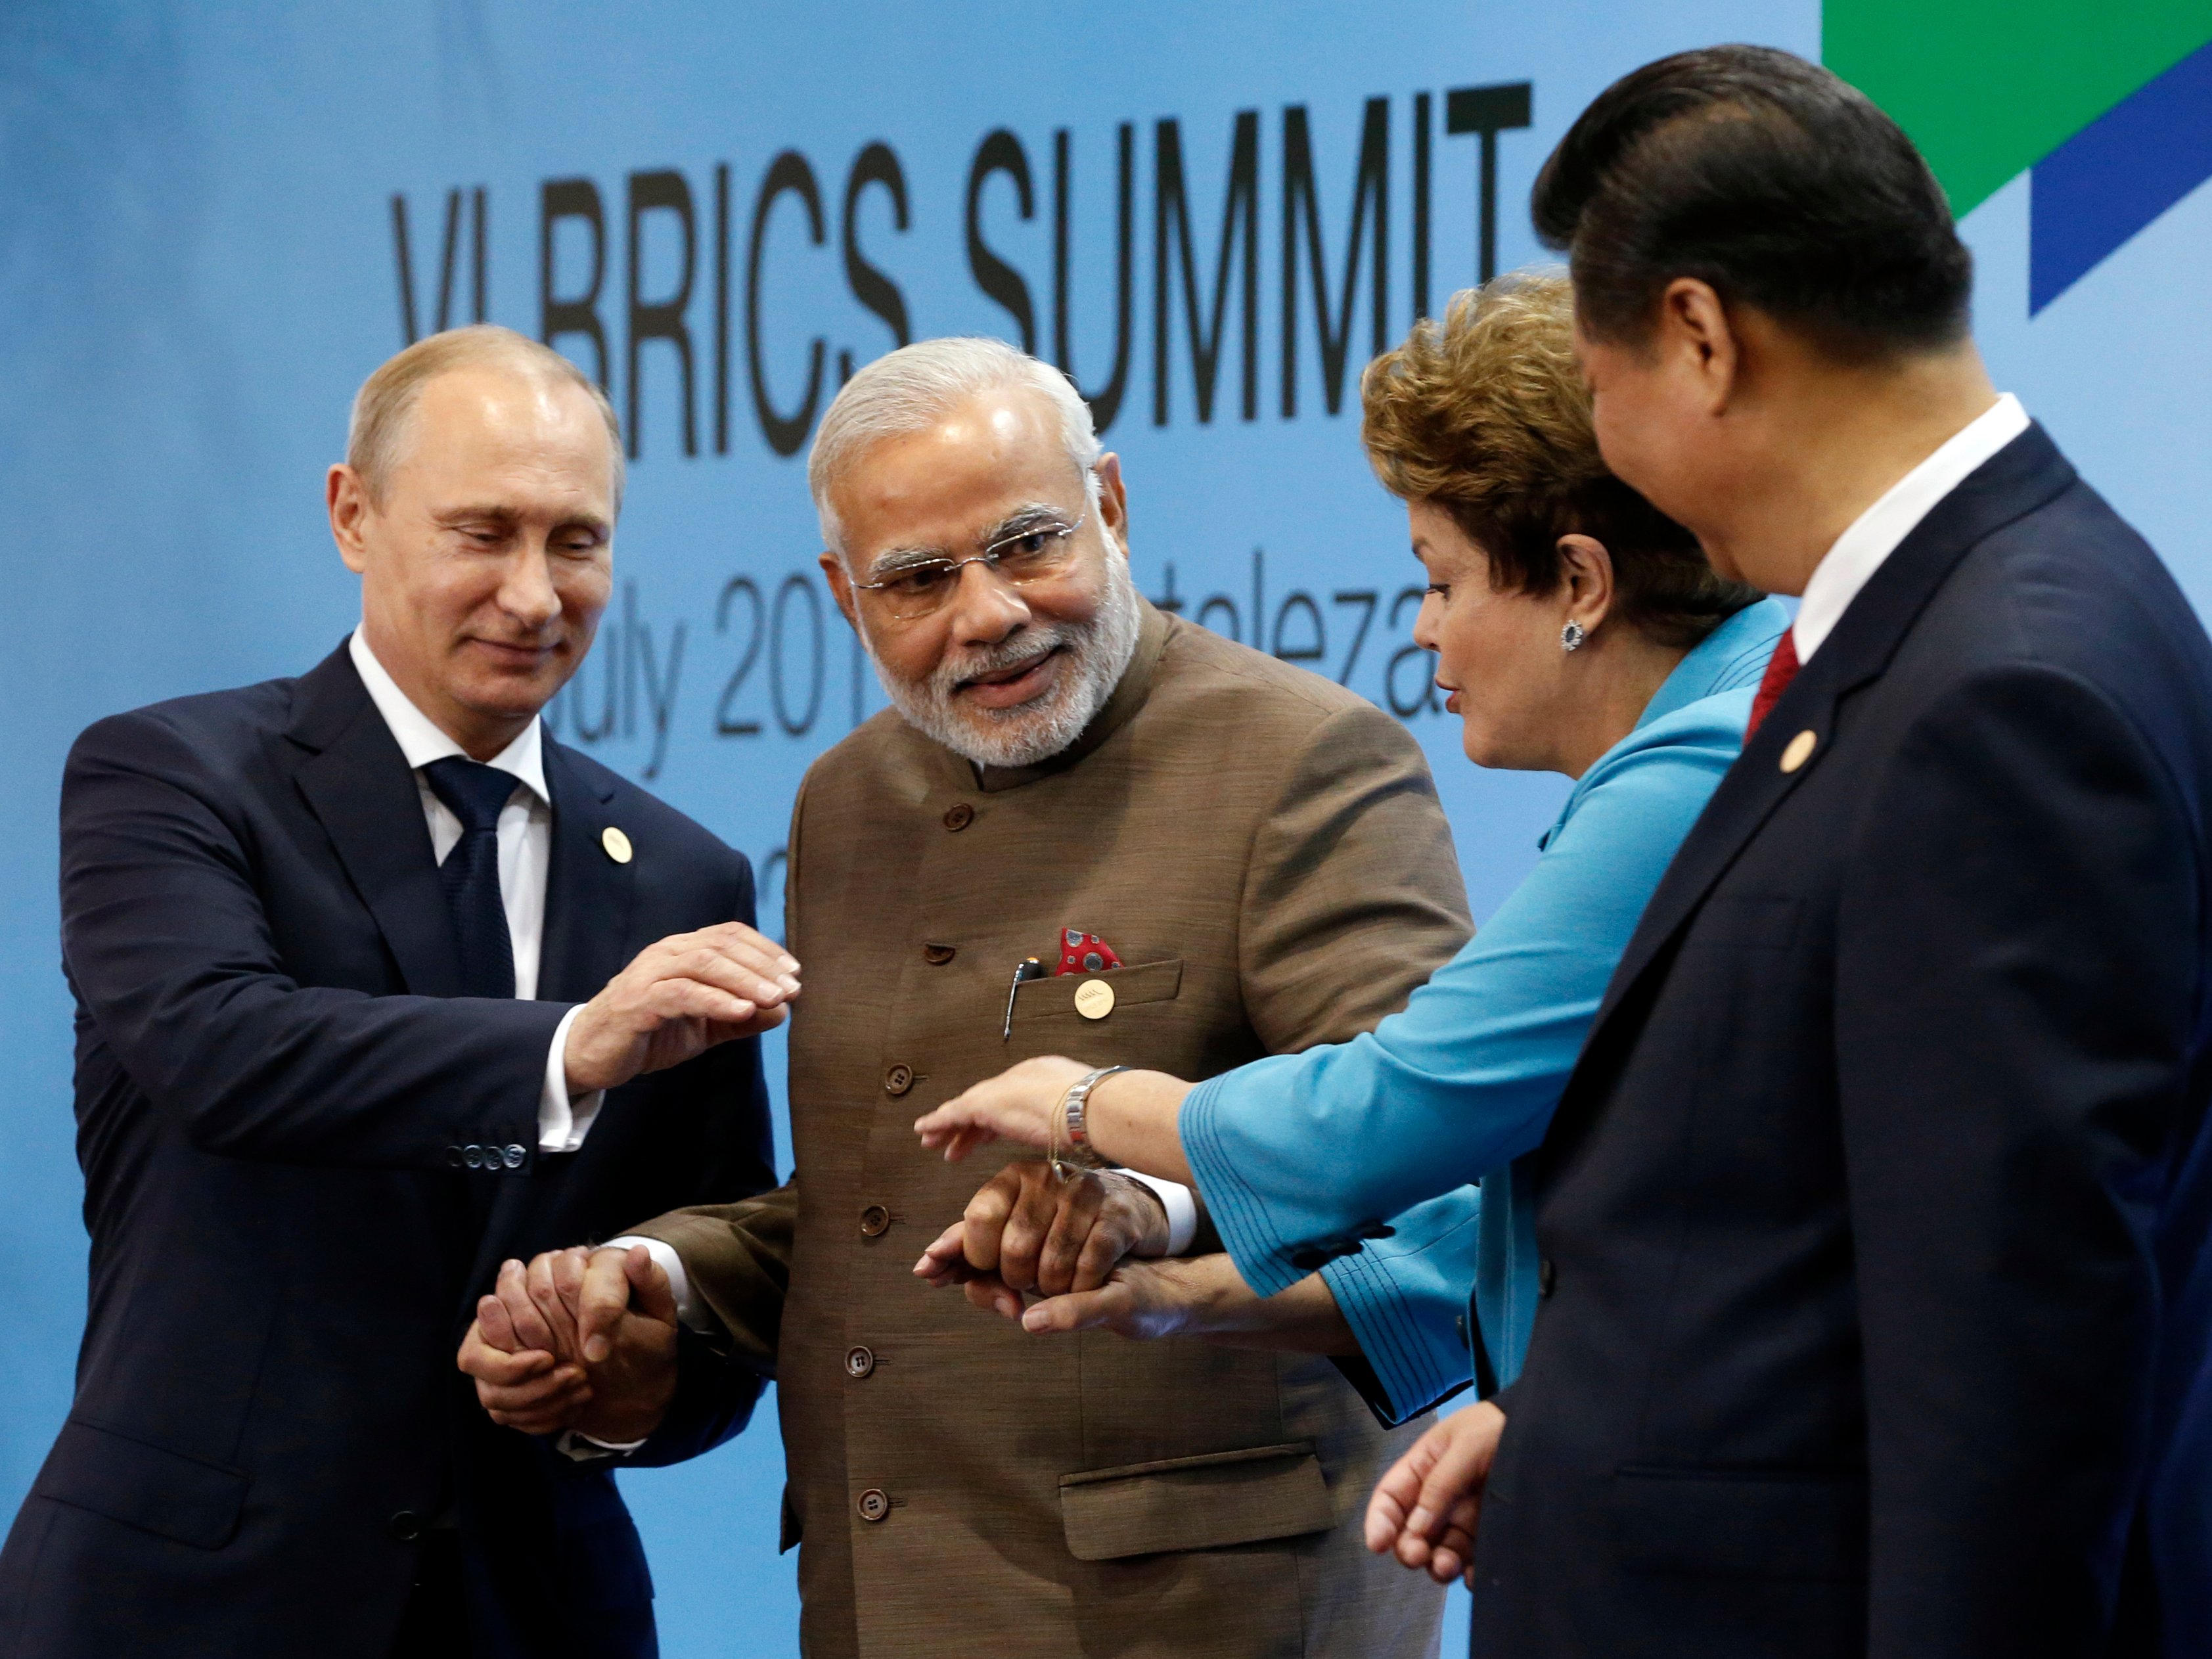 Russia's President Vladimir Putin, India's Prime Minister Narendra Modi, Brazil's President Dilma Rousseff and China's President Xi Jinping pose for a group picture during the VI BRICS Summit in Fortaleza July 15, 2014.